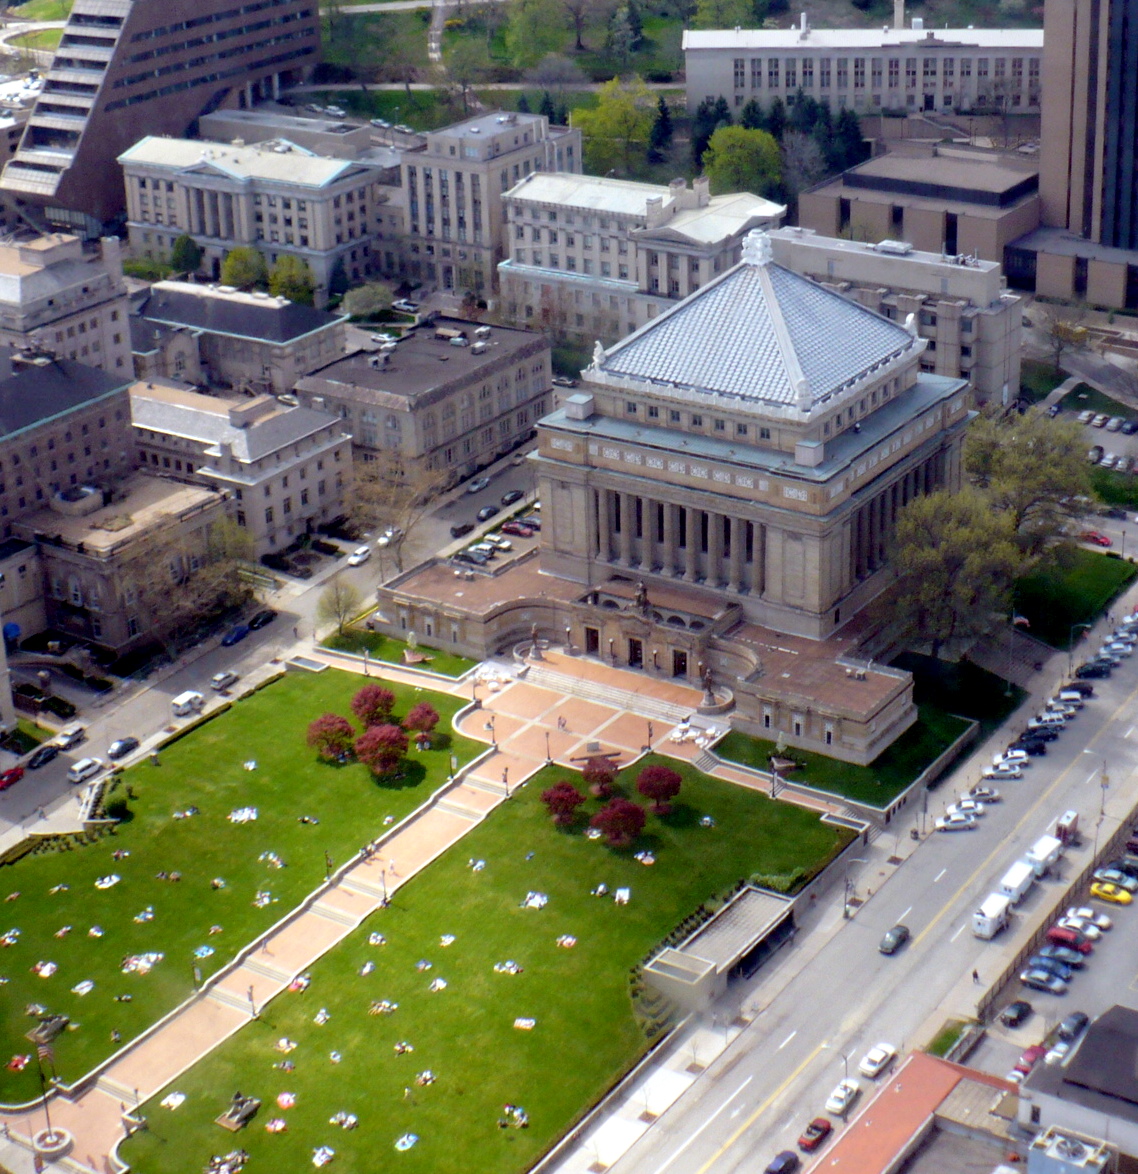 Soldiers_and_Sailors_Memorial_Hall_aerial_view.JPG